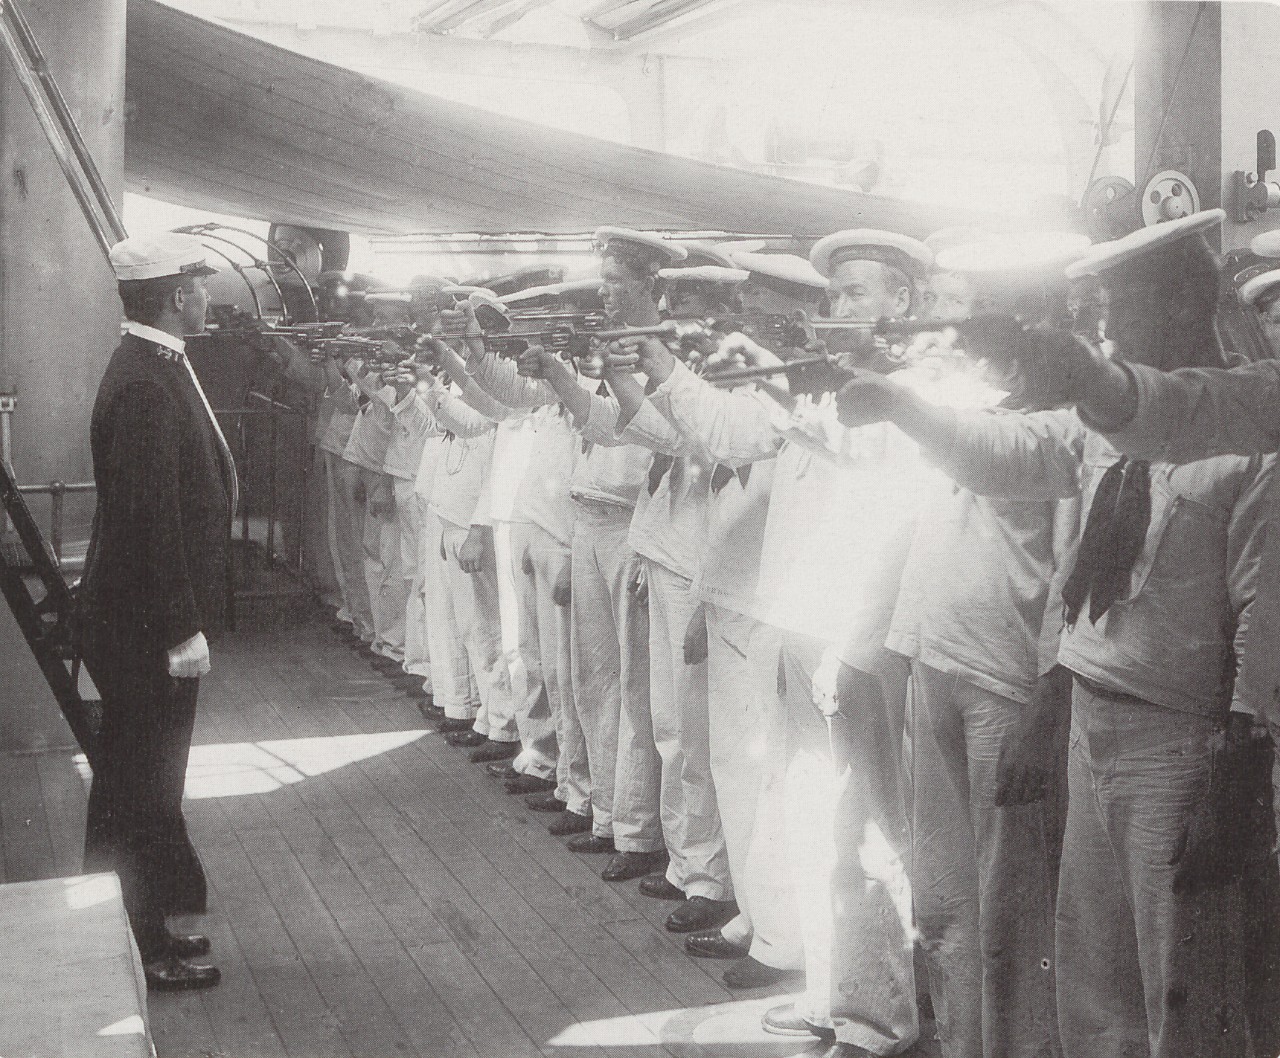 A group of sailors practicing with their pistols on the USS Brooklyn.